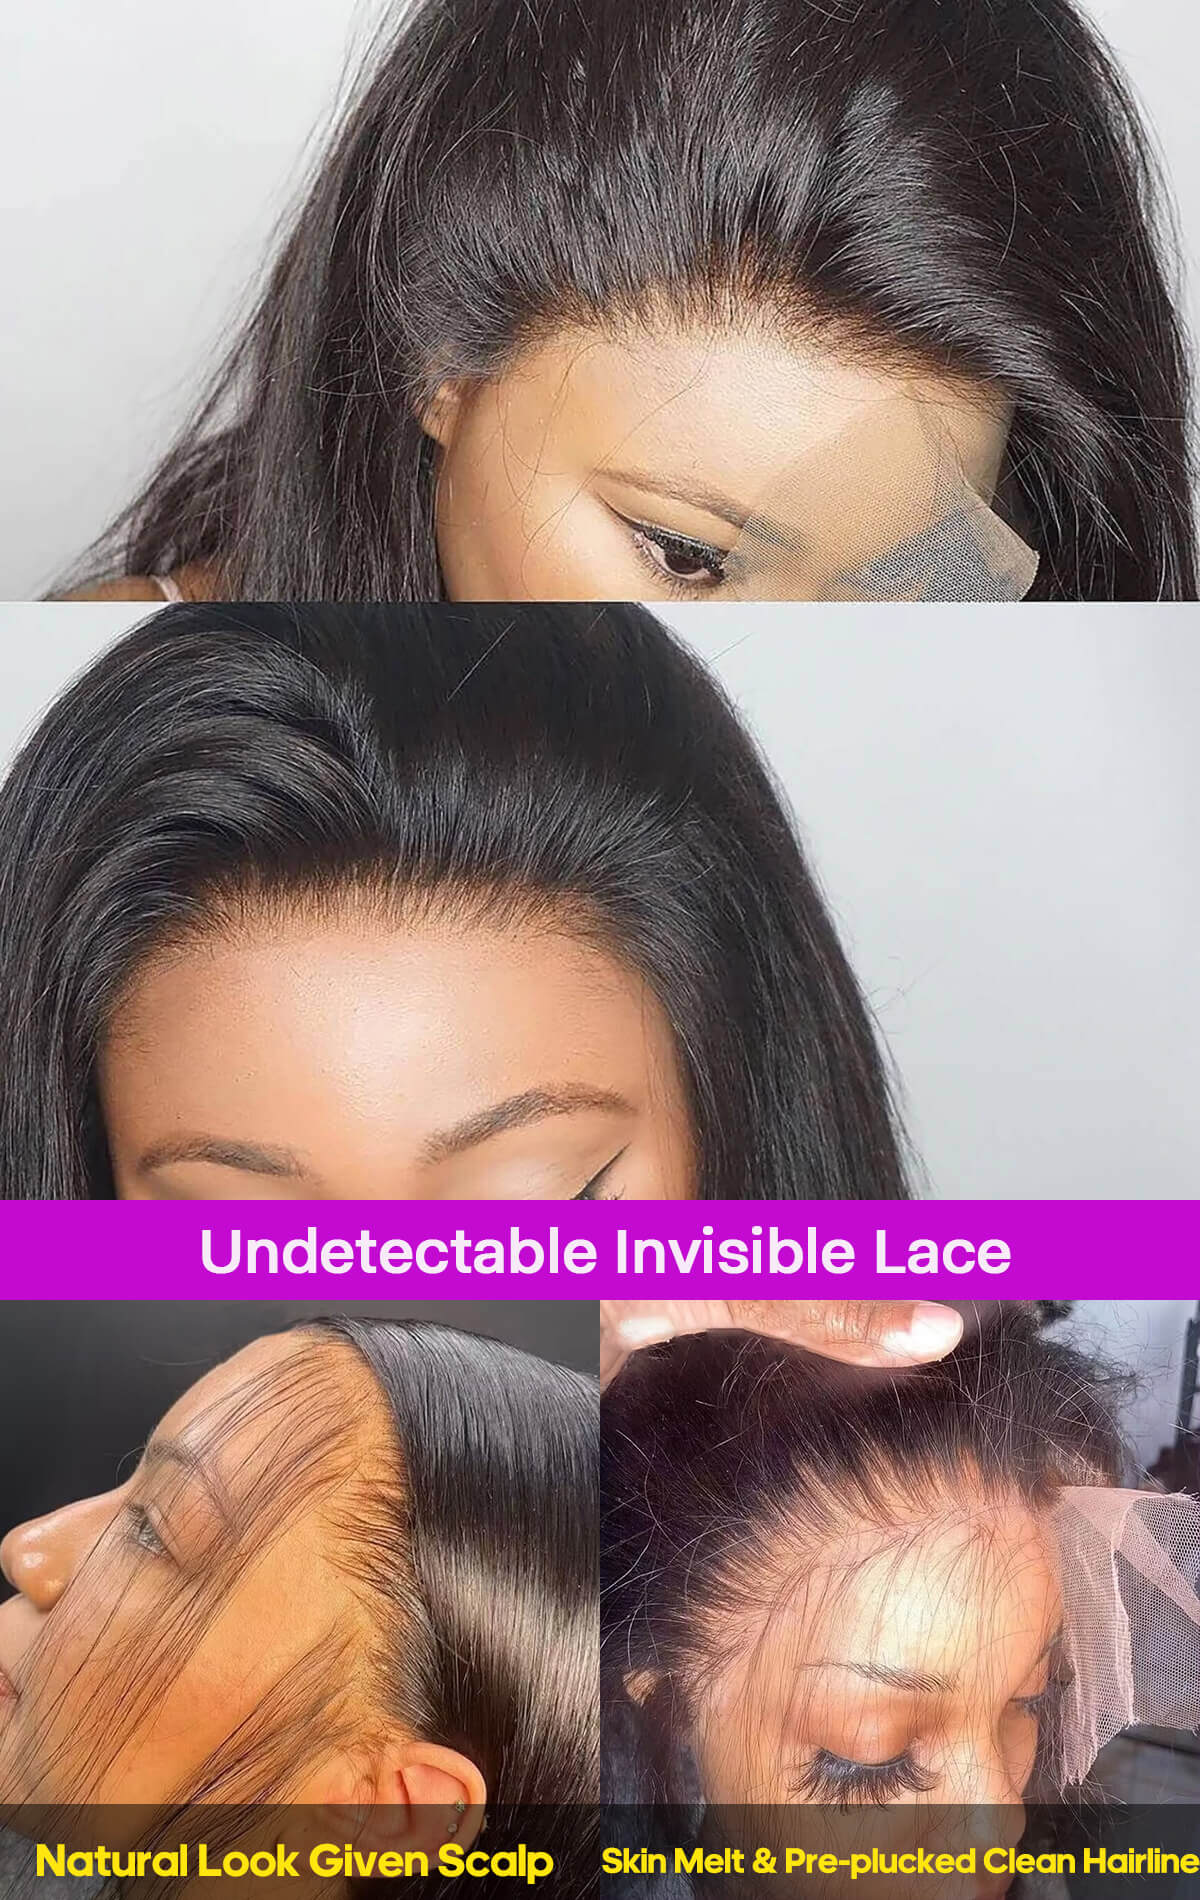 undetectable invisible lace details (2)